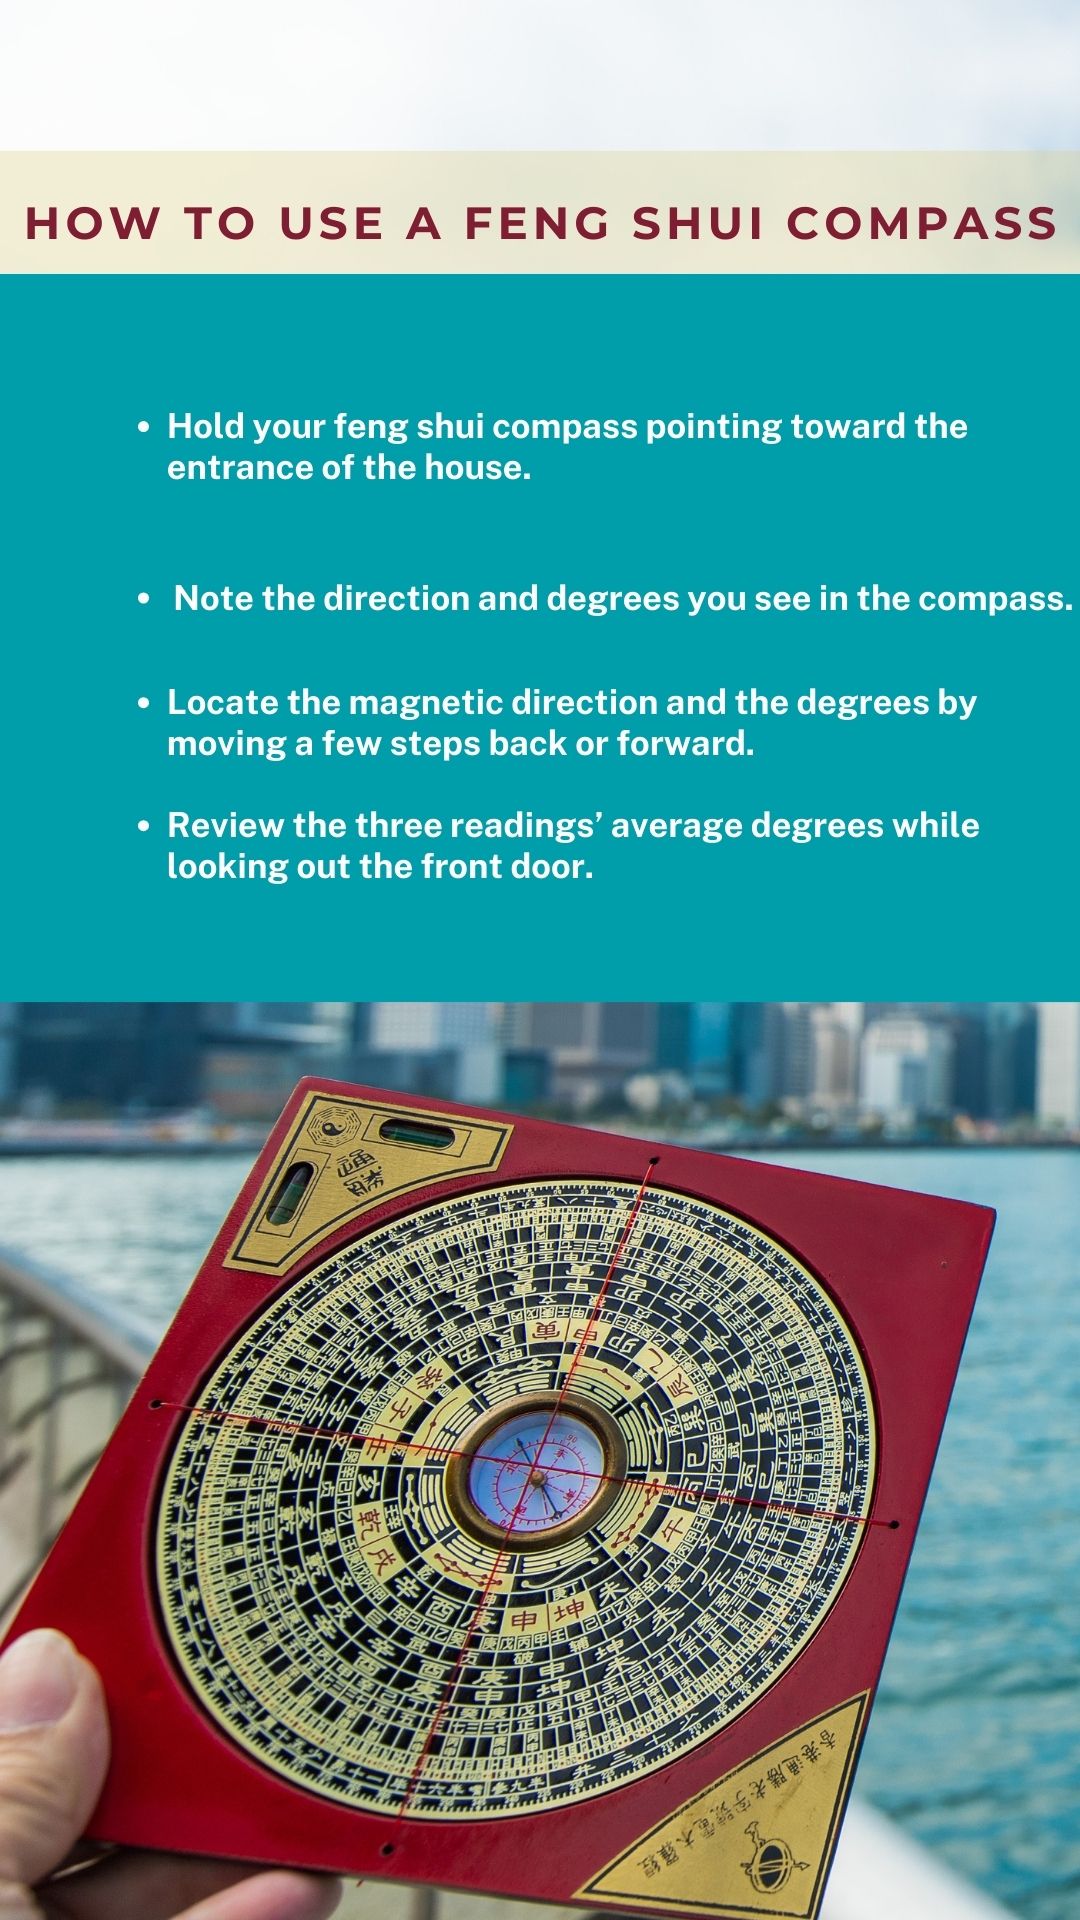 How To Use A Feng Shui Compass